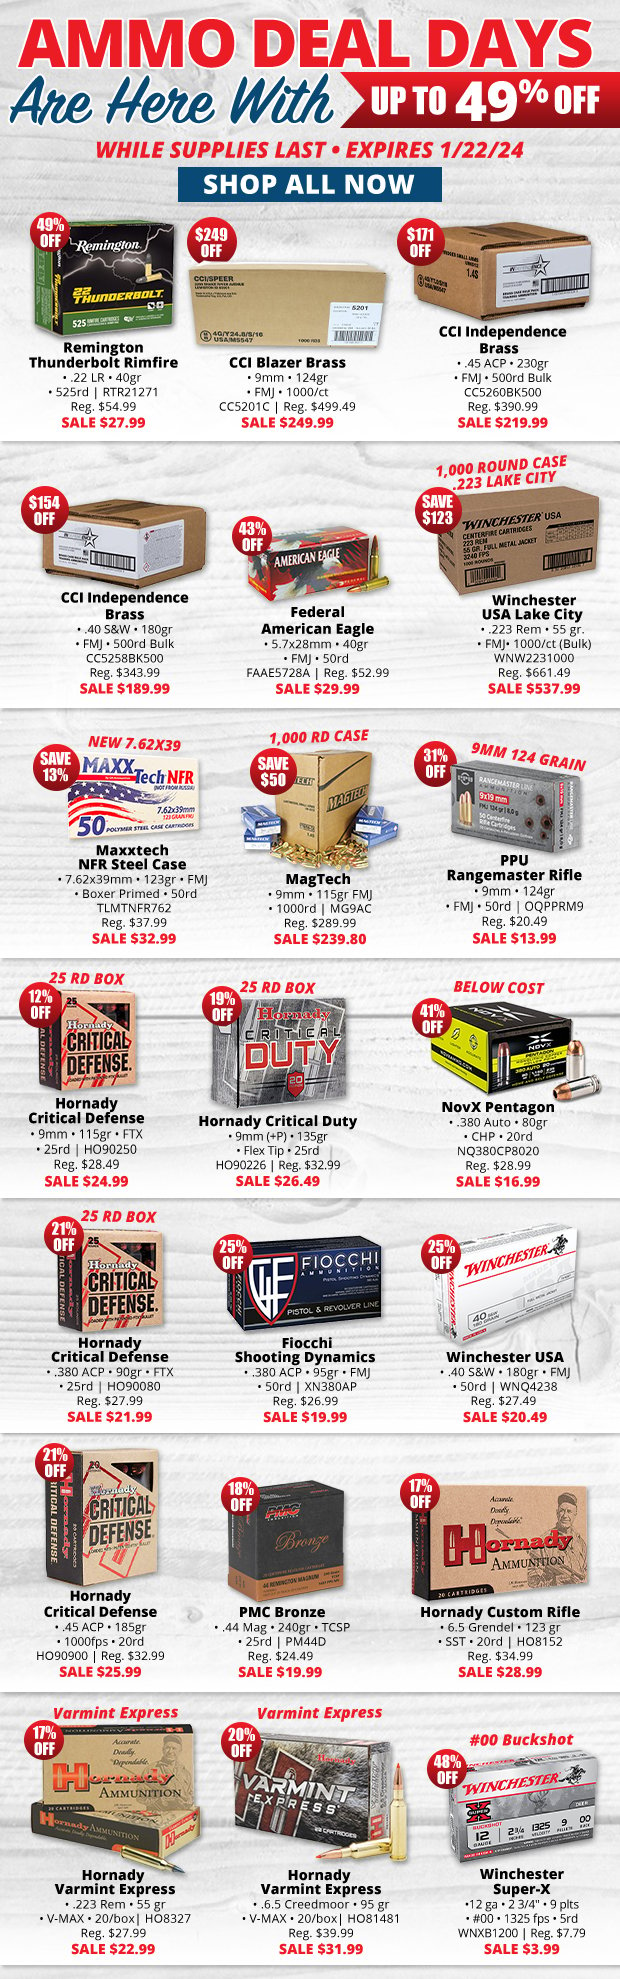 Up to 49% Off on Ammo Deals Days!